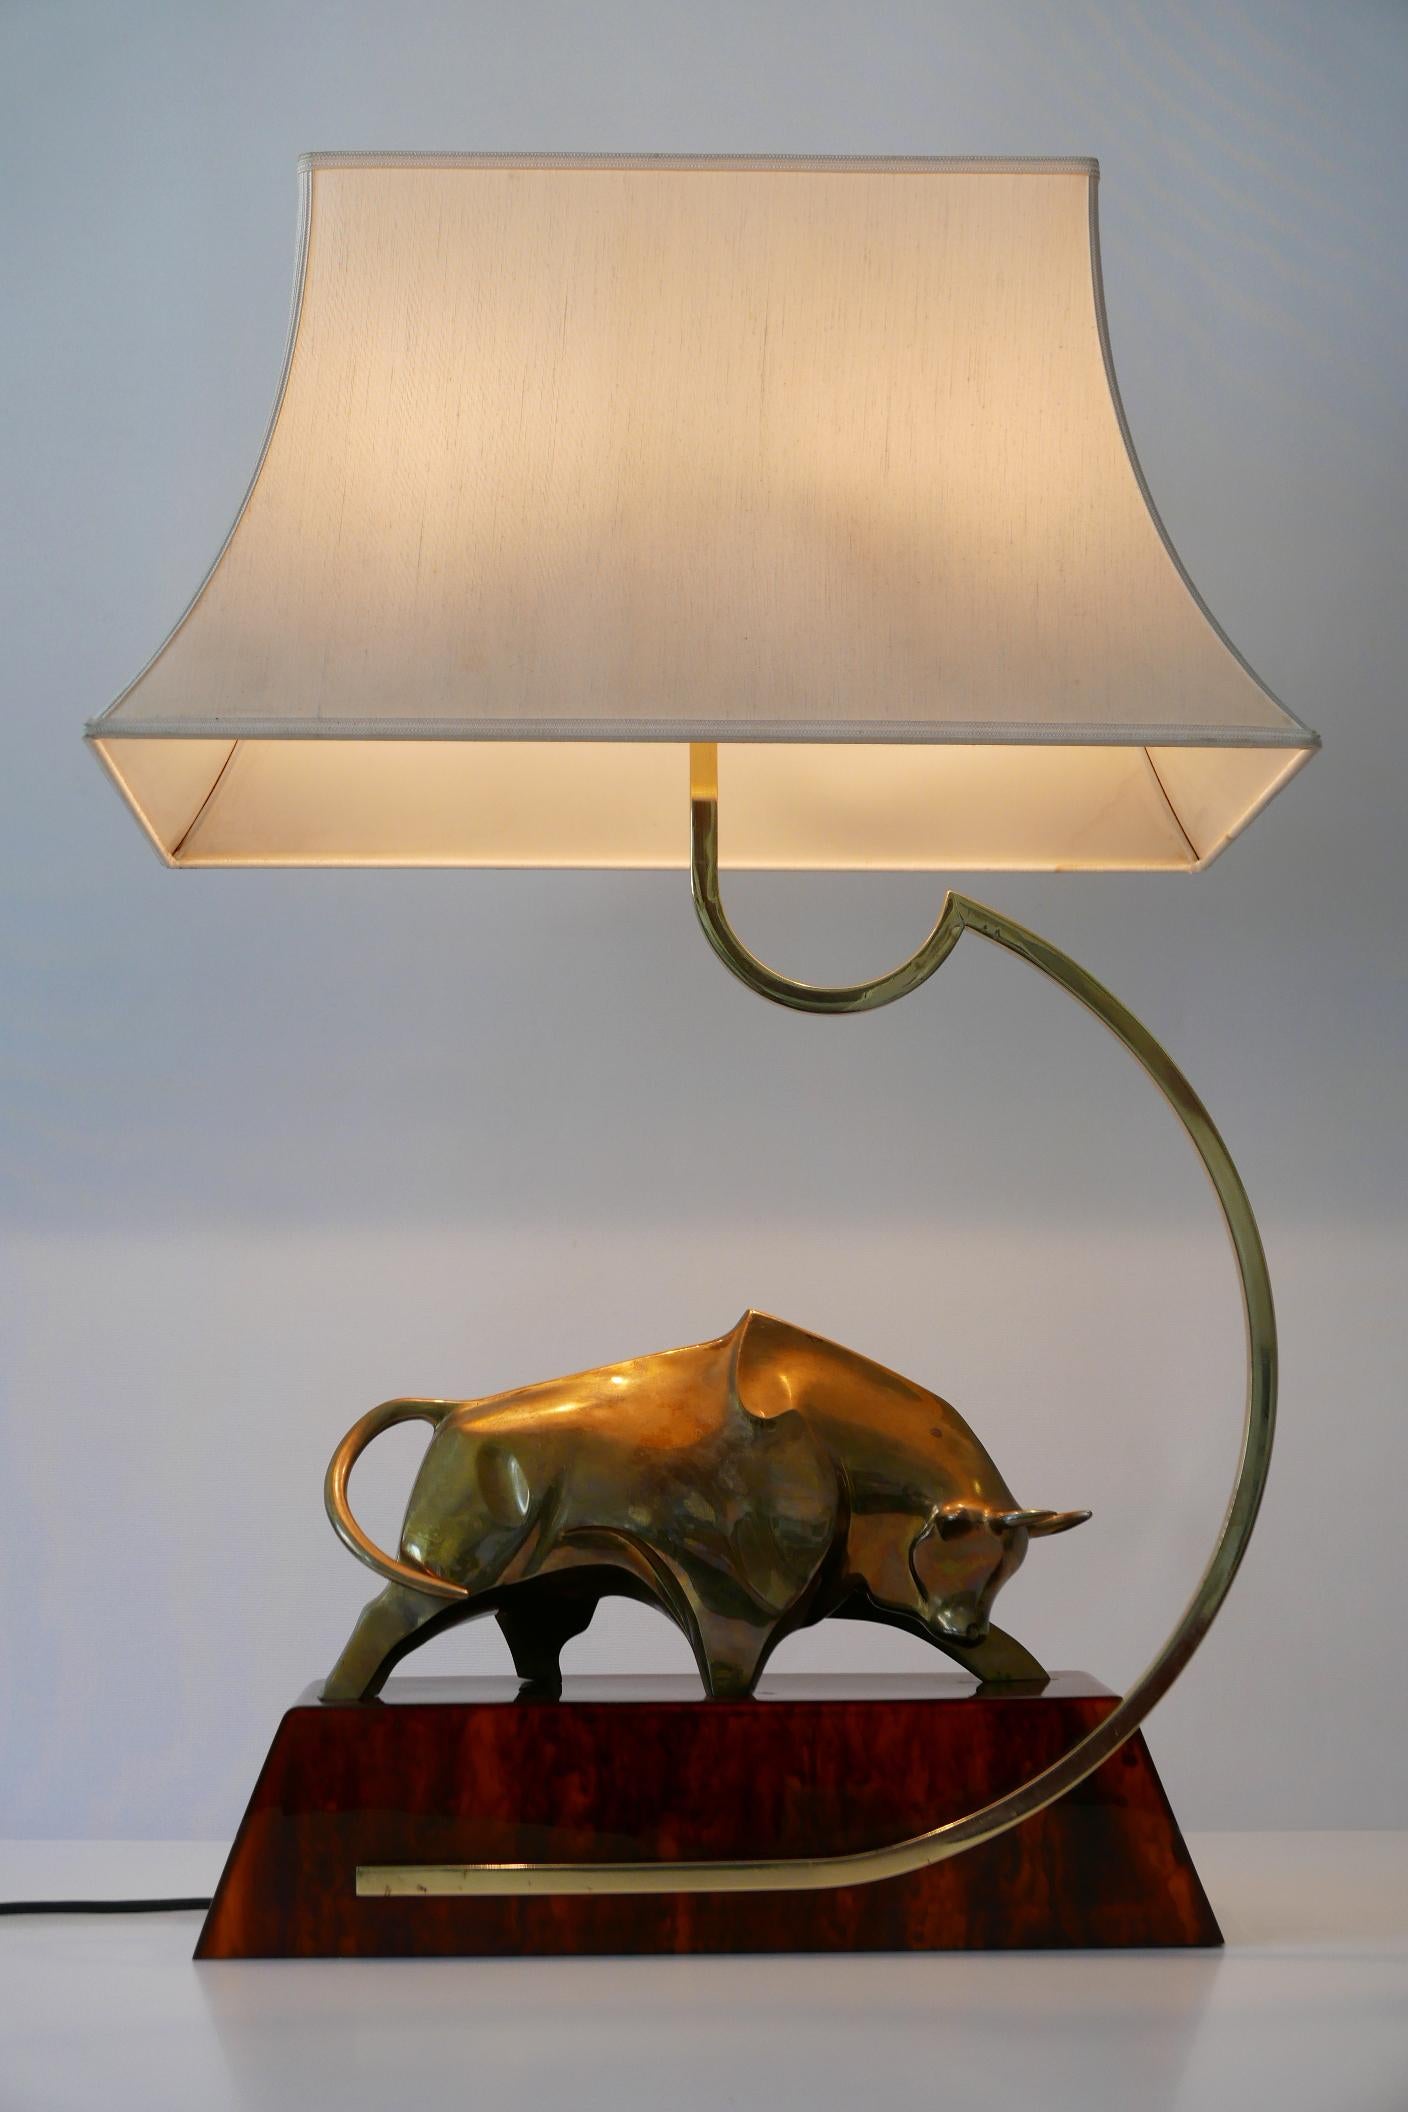 Exceptional, Modernist brass light sculpture or table lamp 'Bull' by D. Delo for Pragos, 1970s, Italy.
Signed and numbered: d. delo, 40/150 LT.

Executed in brass and resin base, the lamp comes with 2 x E27 / E26 Edison screw fit bulb sockets, is